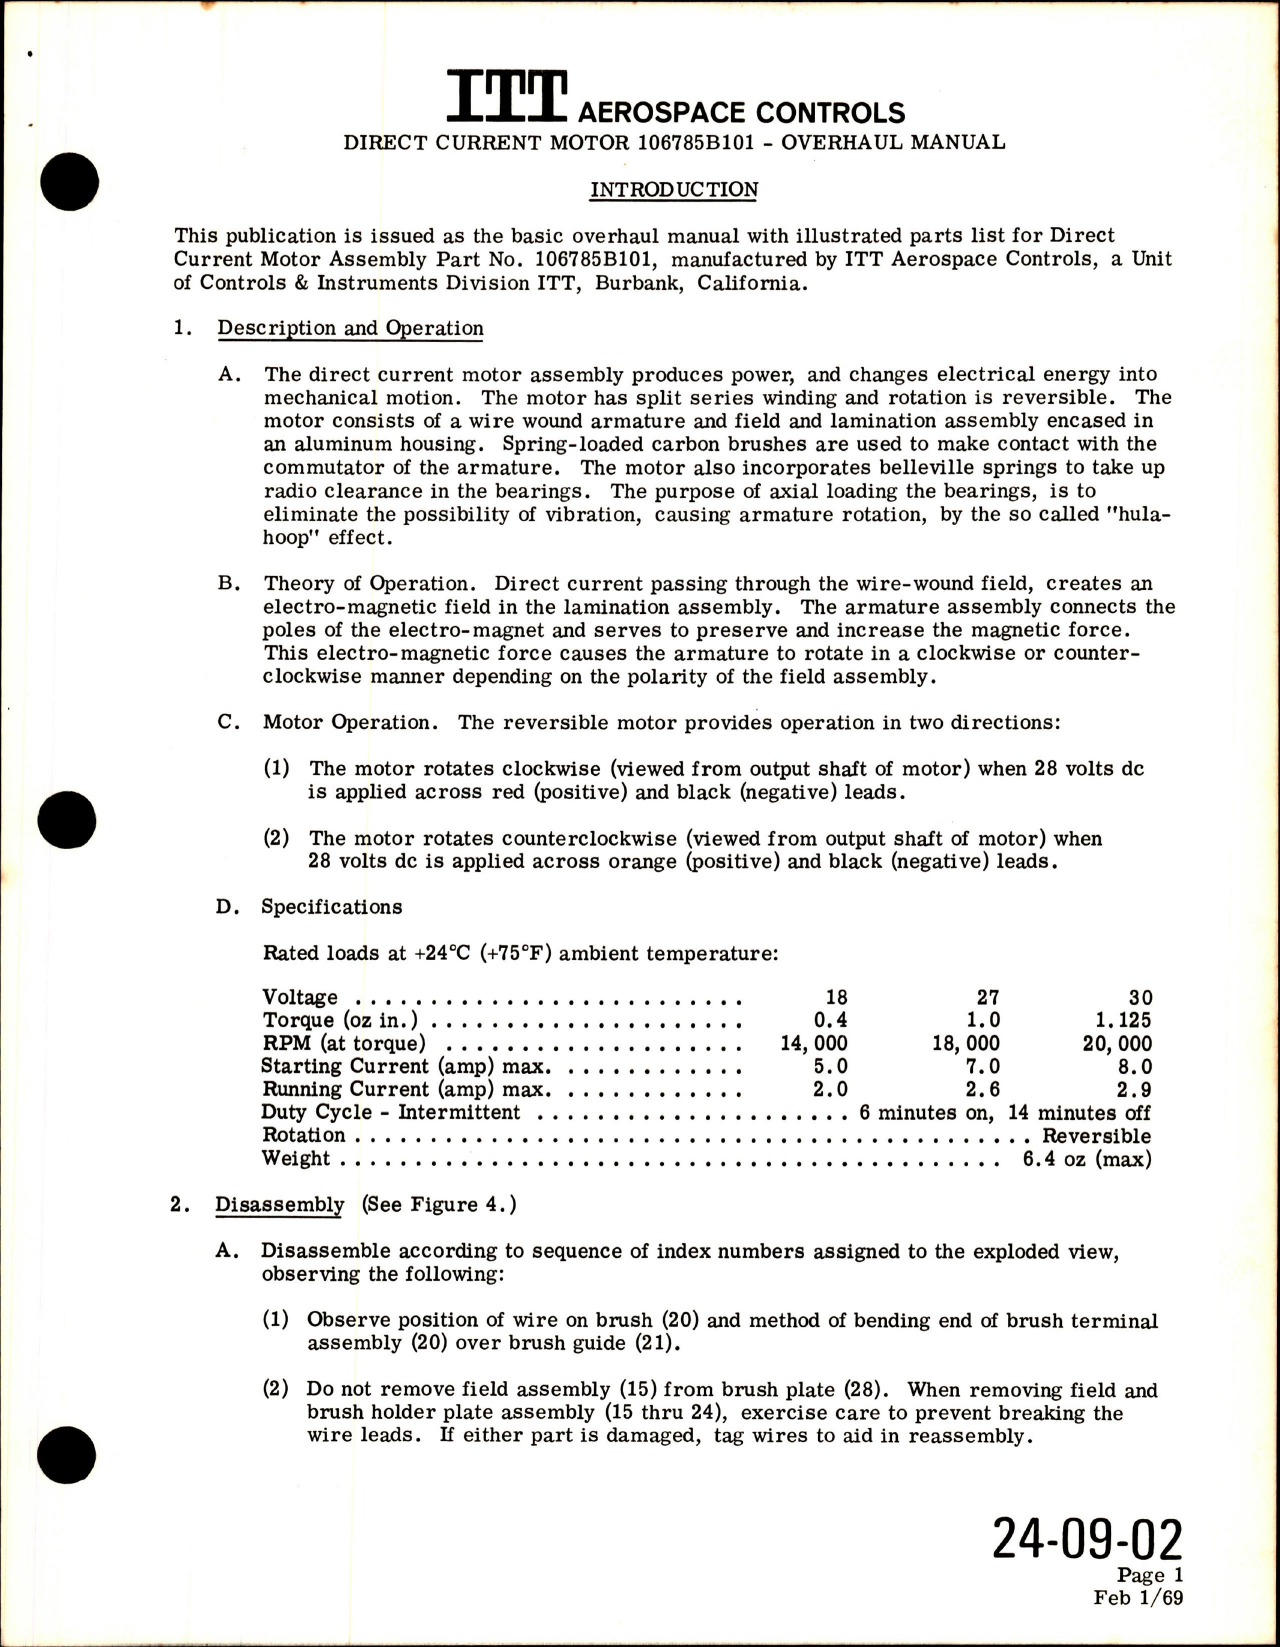 Sample page 7 from AirCorps Library document: Overhaul Manual with Illustrated Parts List for DC Motor Assembly - Part 106785B101 